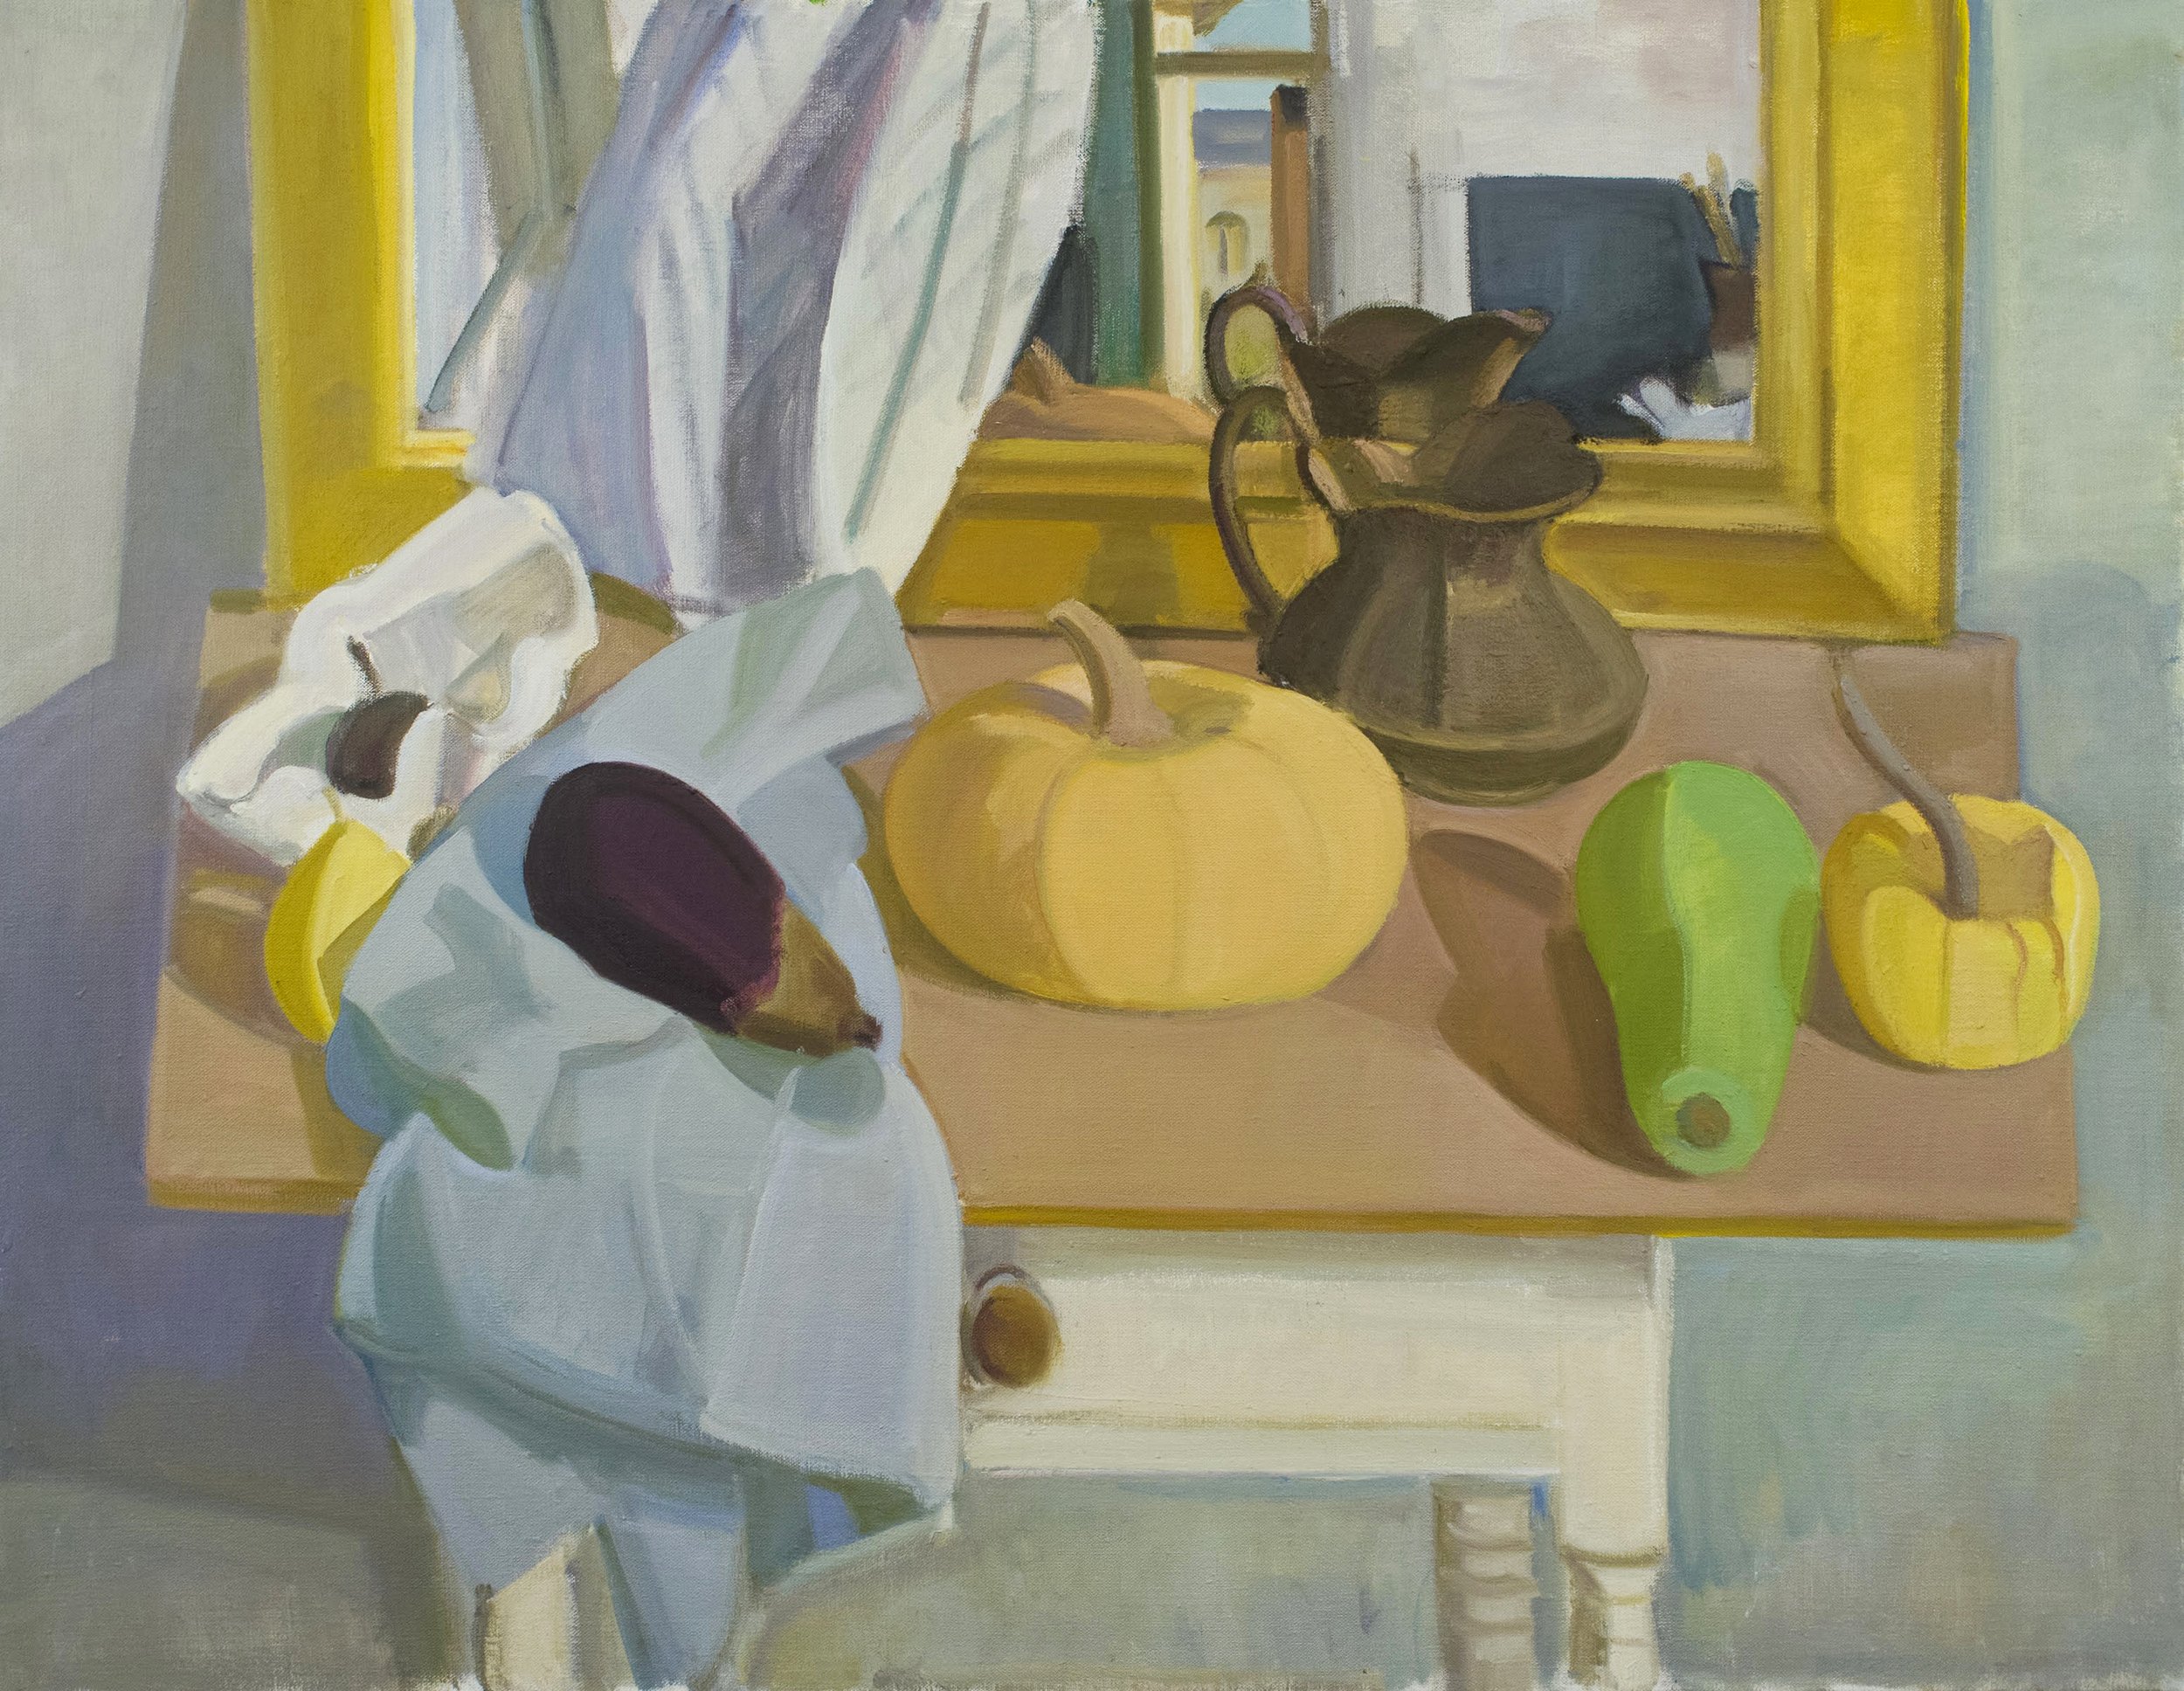   Still Life on Table with Mirror Behind , c. 2008, oil/canvas, 28 x 36 in. Private collection)  